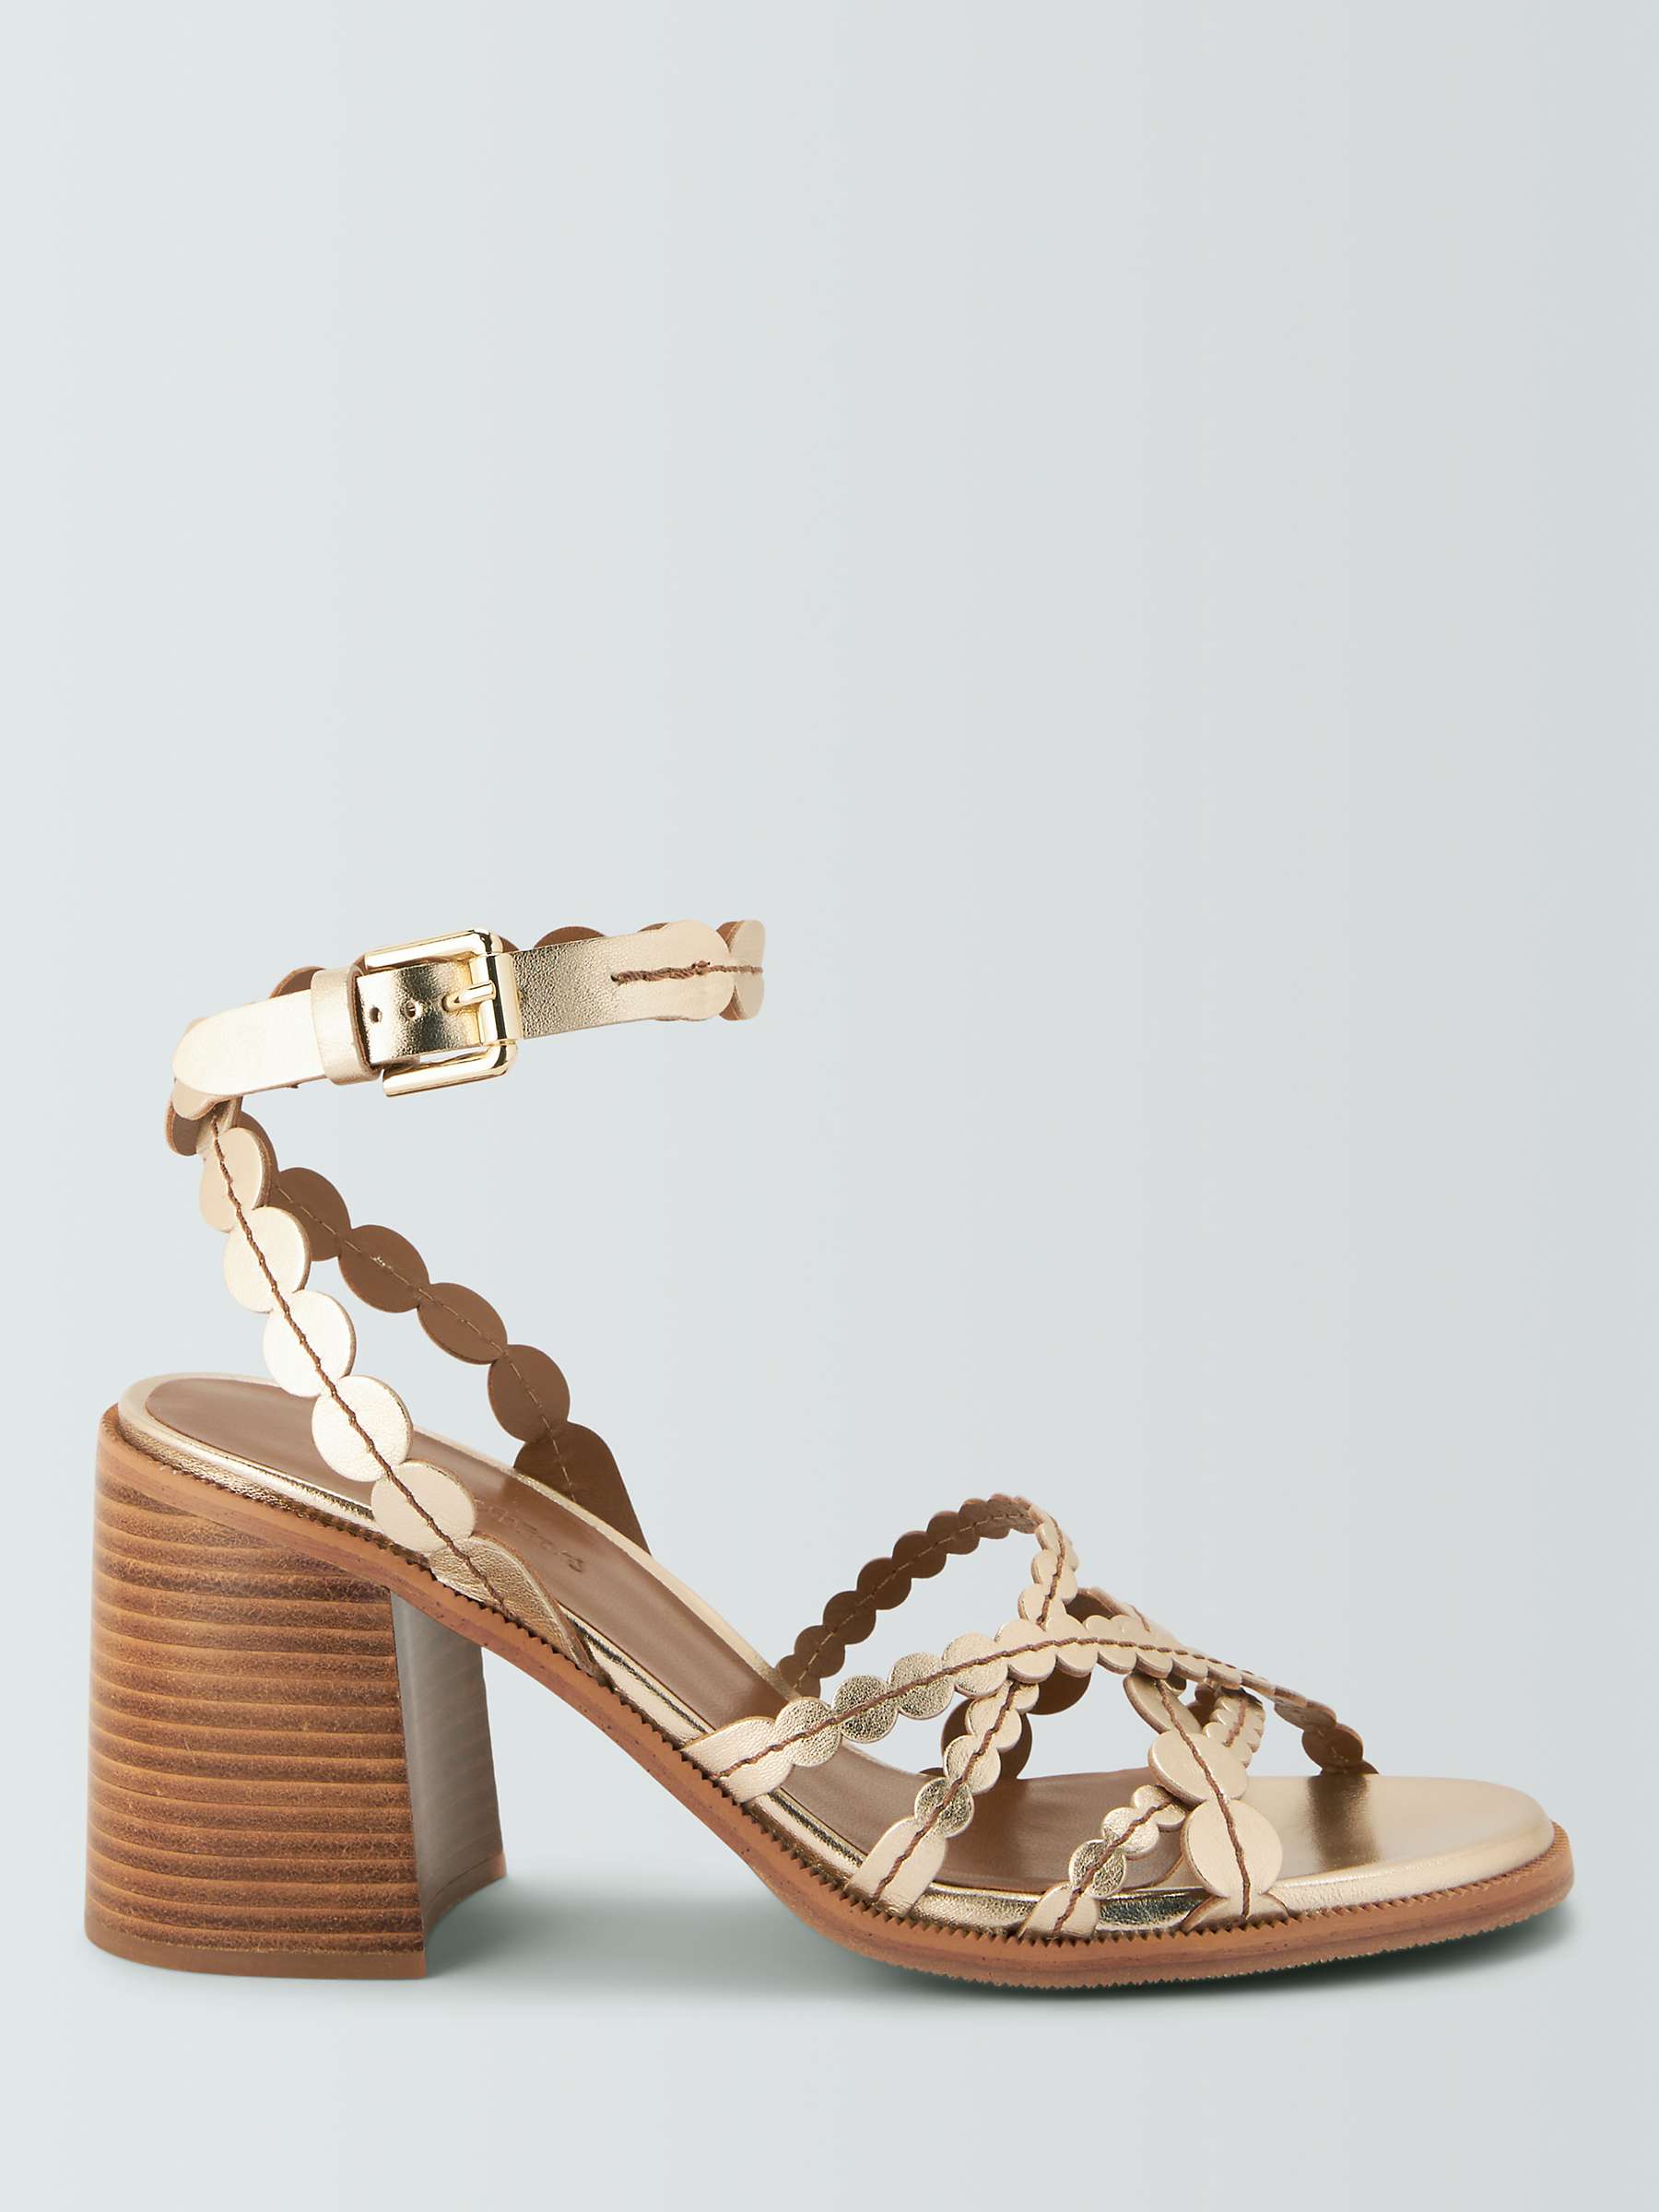 Buy See By Chloé Kaddy Leather Circle Strap Sandals, Light Gold Online at johnlewis.com